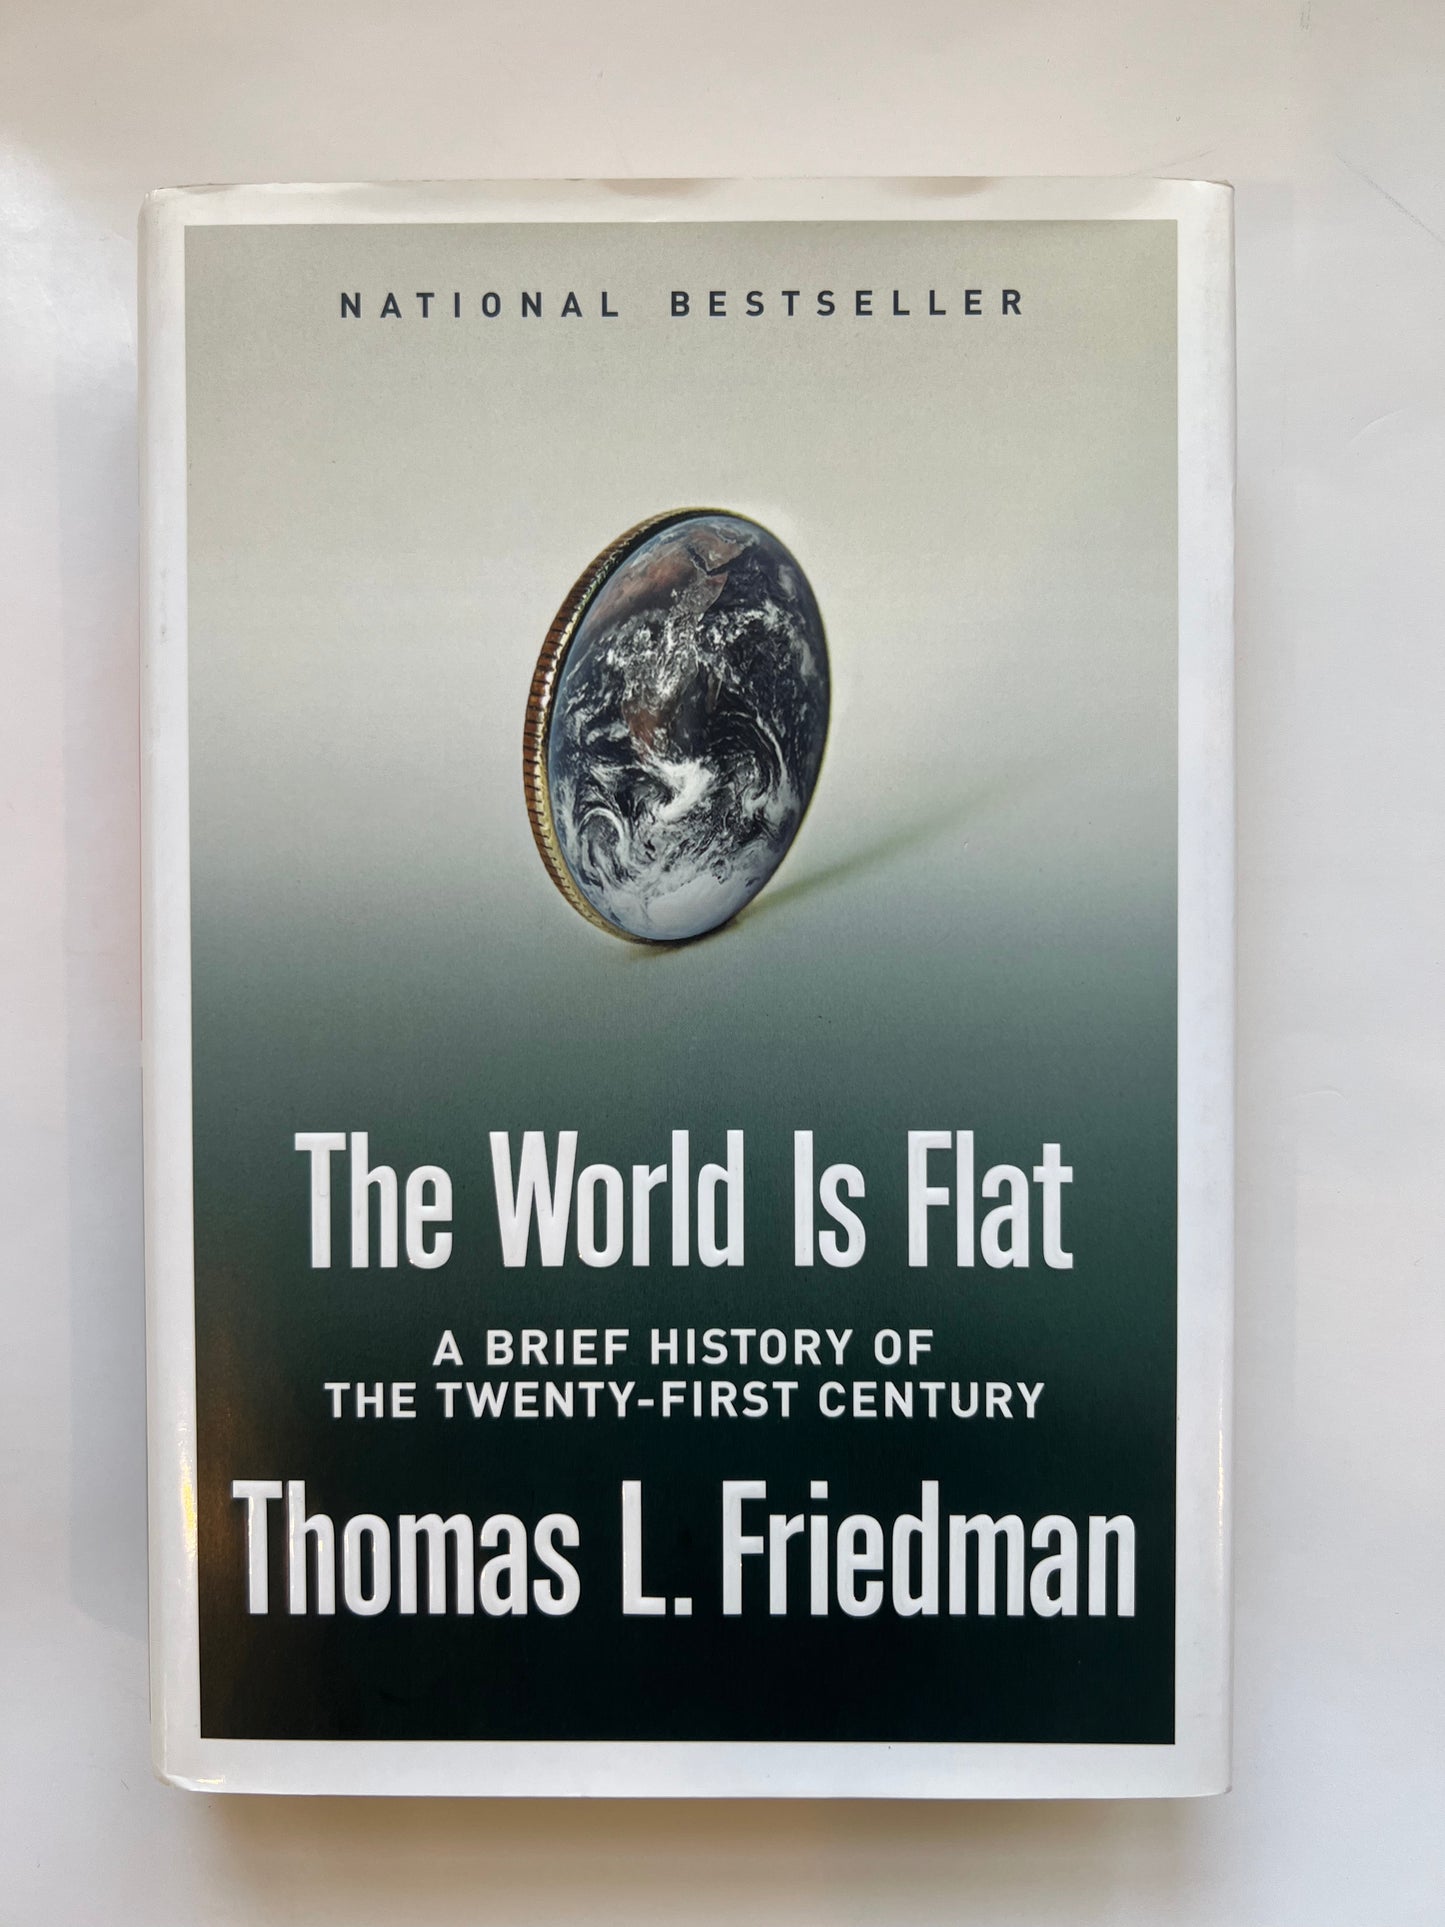 The World is Flat: A Brief History of the Twenty-First Century